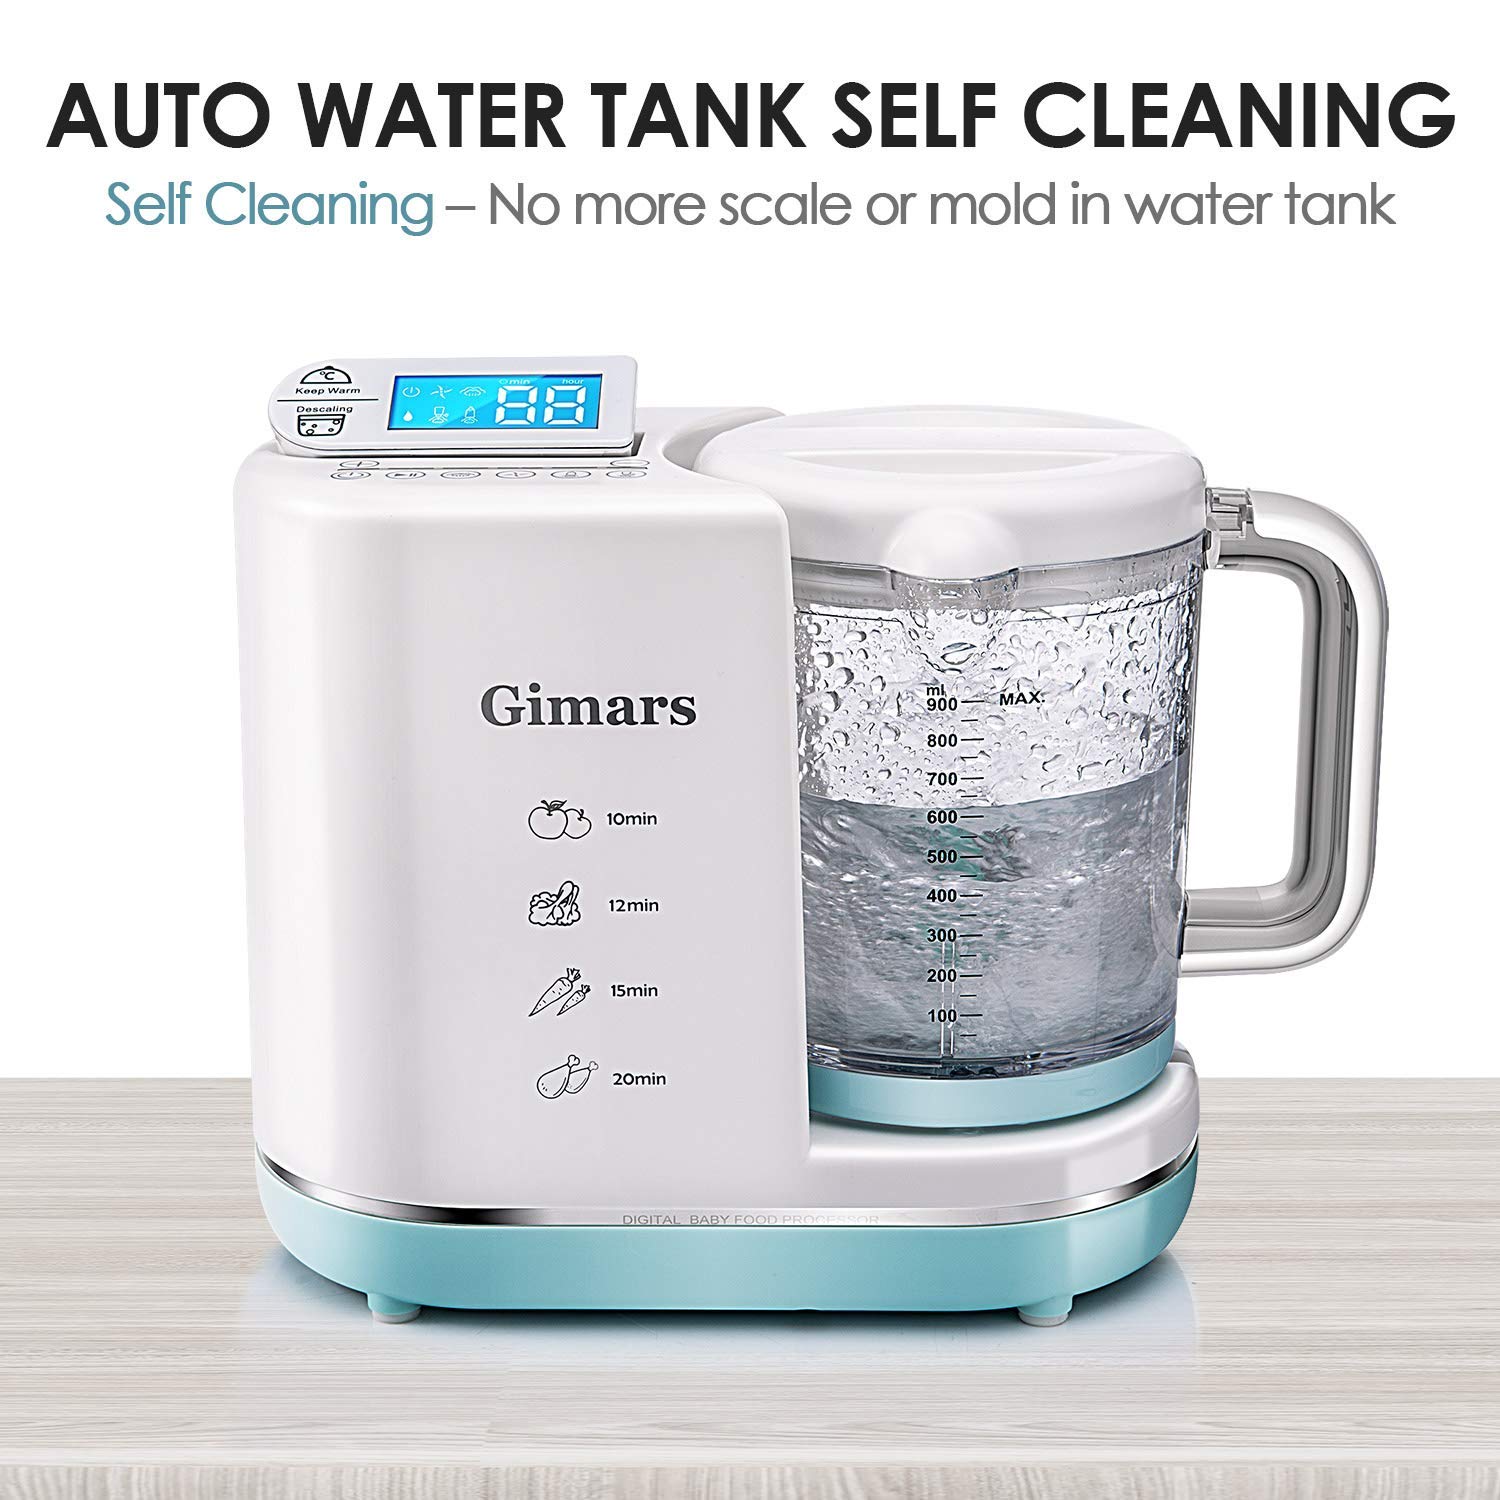 Gimars Upgrade 700W Auto Cleaning Fast Puree Steaming Baby Food Maker –  Pete's Baby Essentials